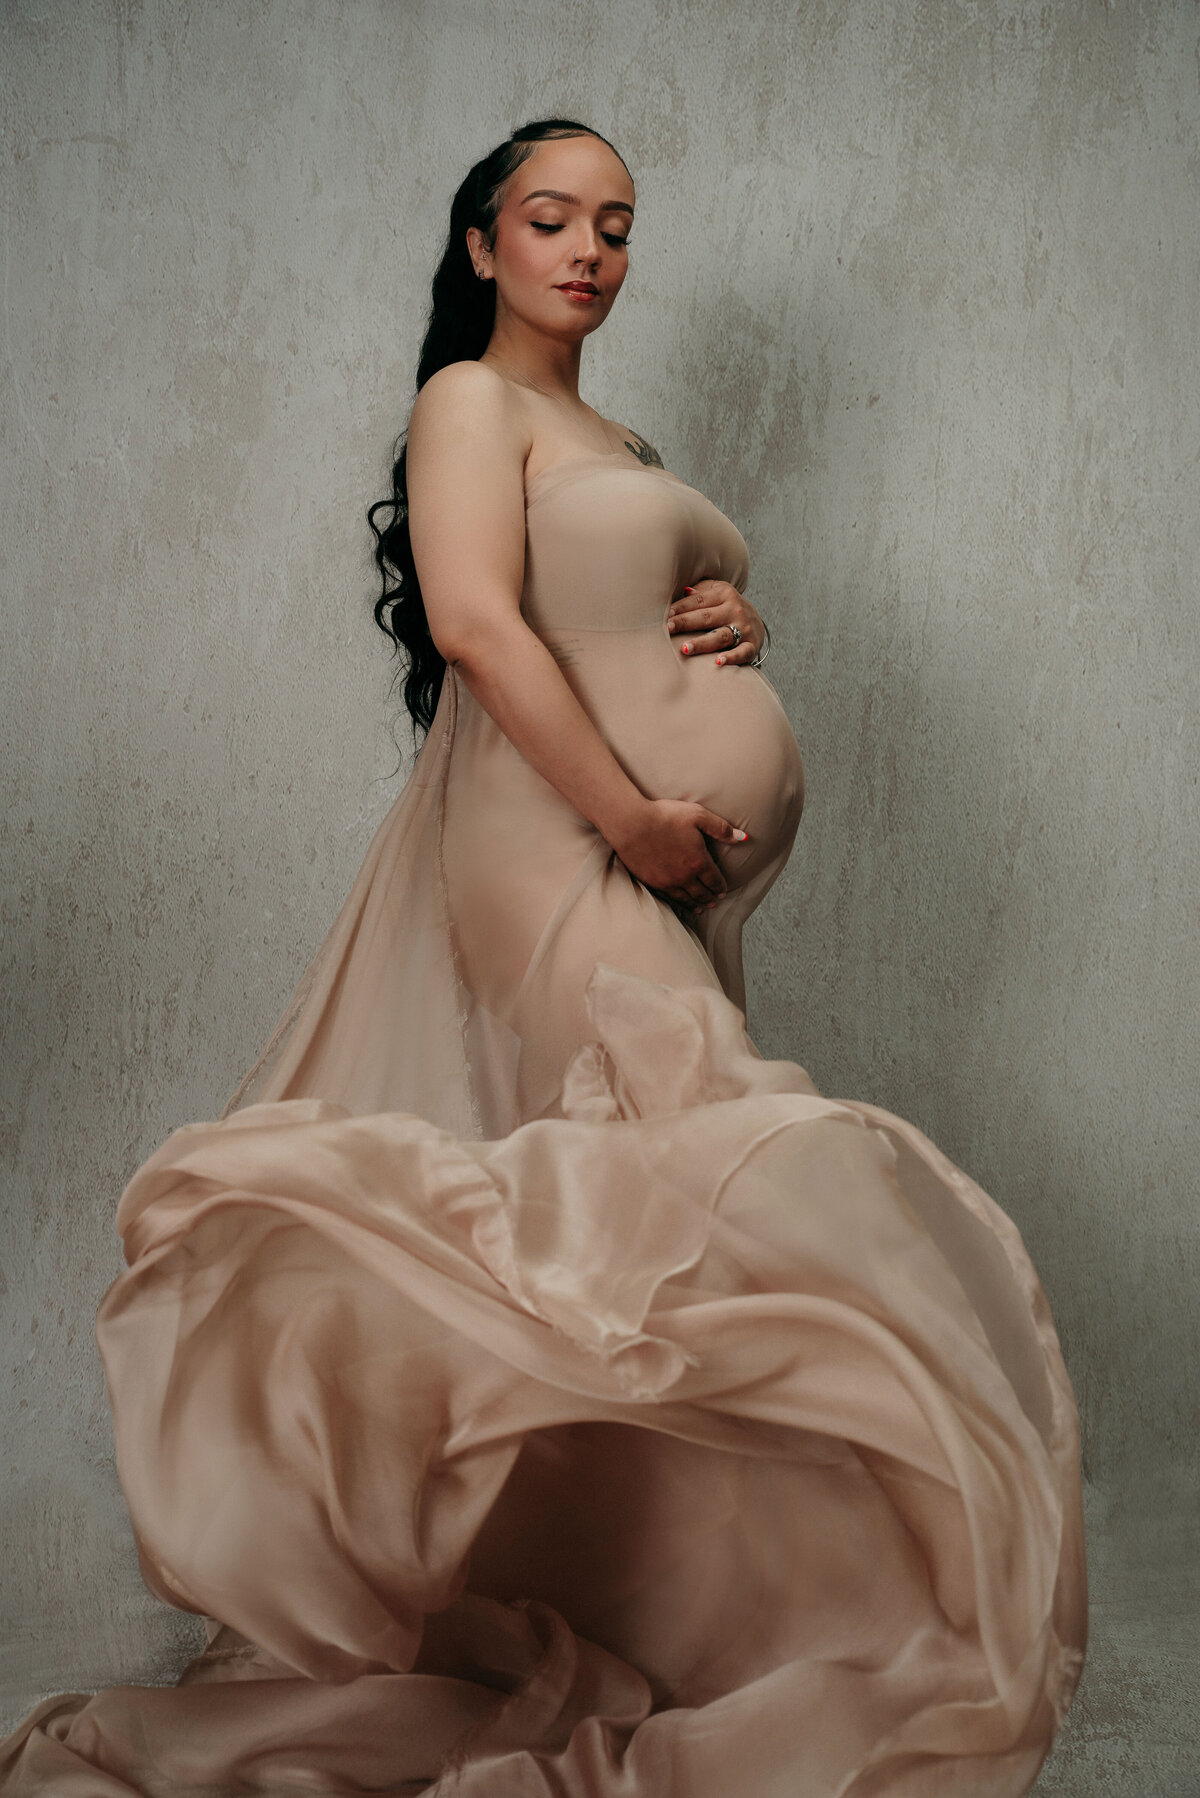 Pregnant woman with long black ponytail posing holding baby bump wrapped in tan chiffon fabric flowing around her